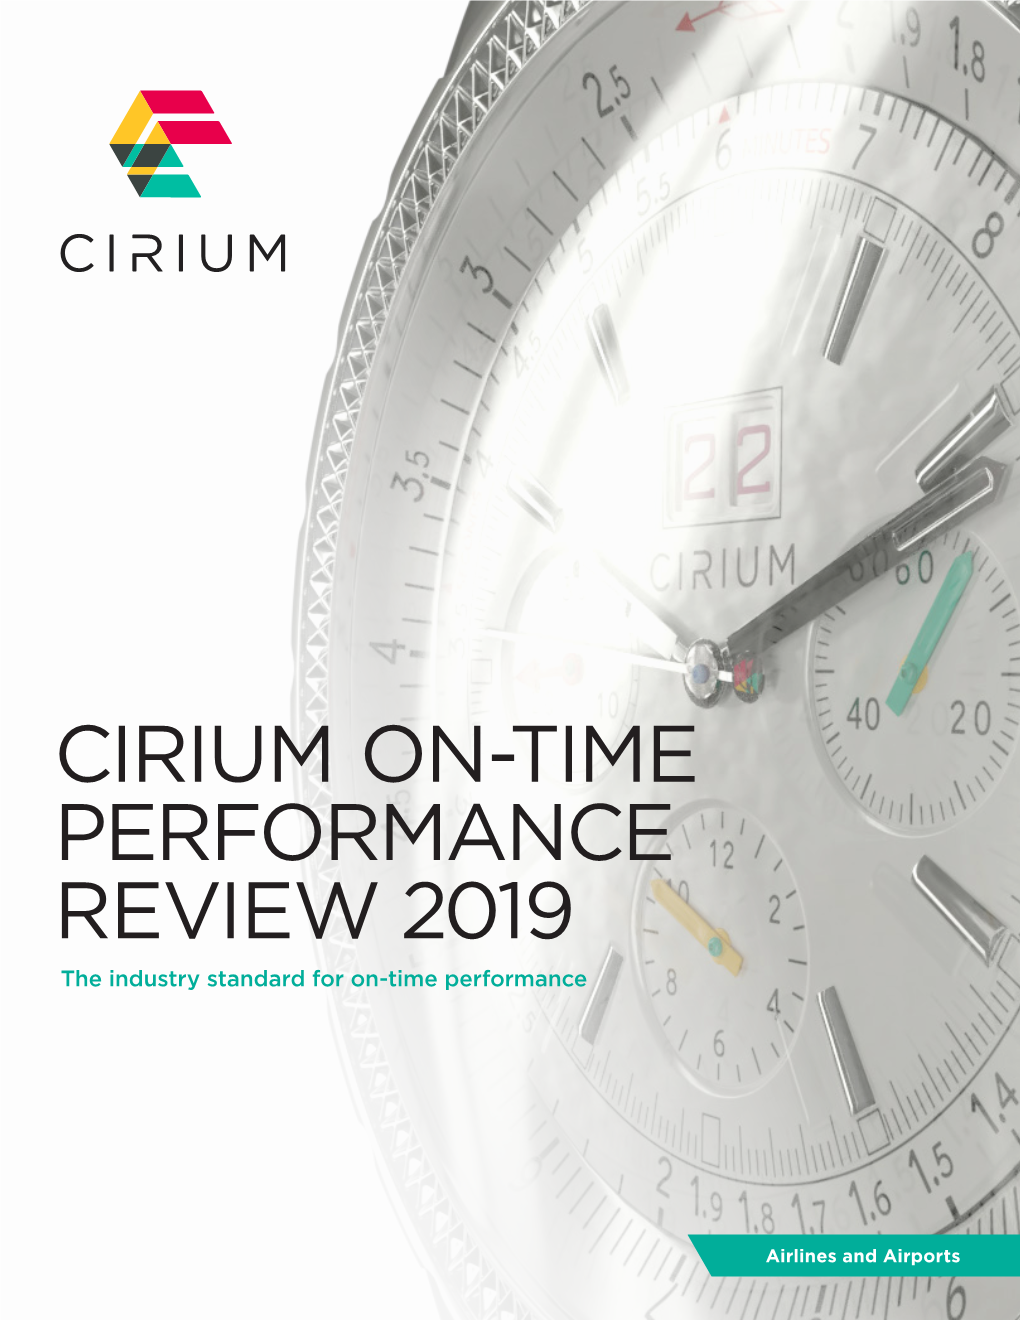 CIRIUM ON-TIME PERFORMANCE REVIEW 2019 the Industry Standard for On-Time Performance